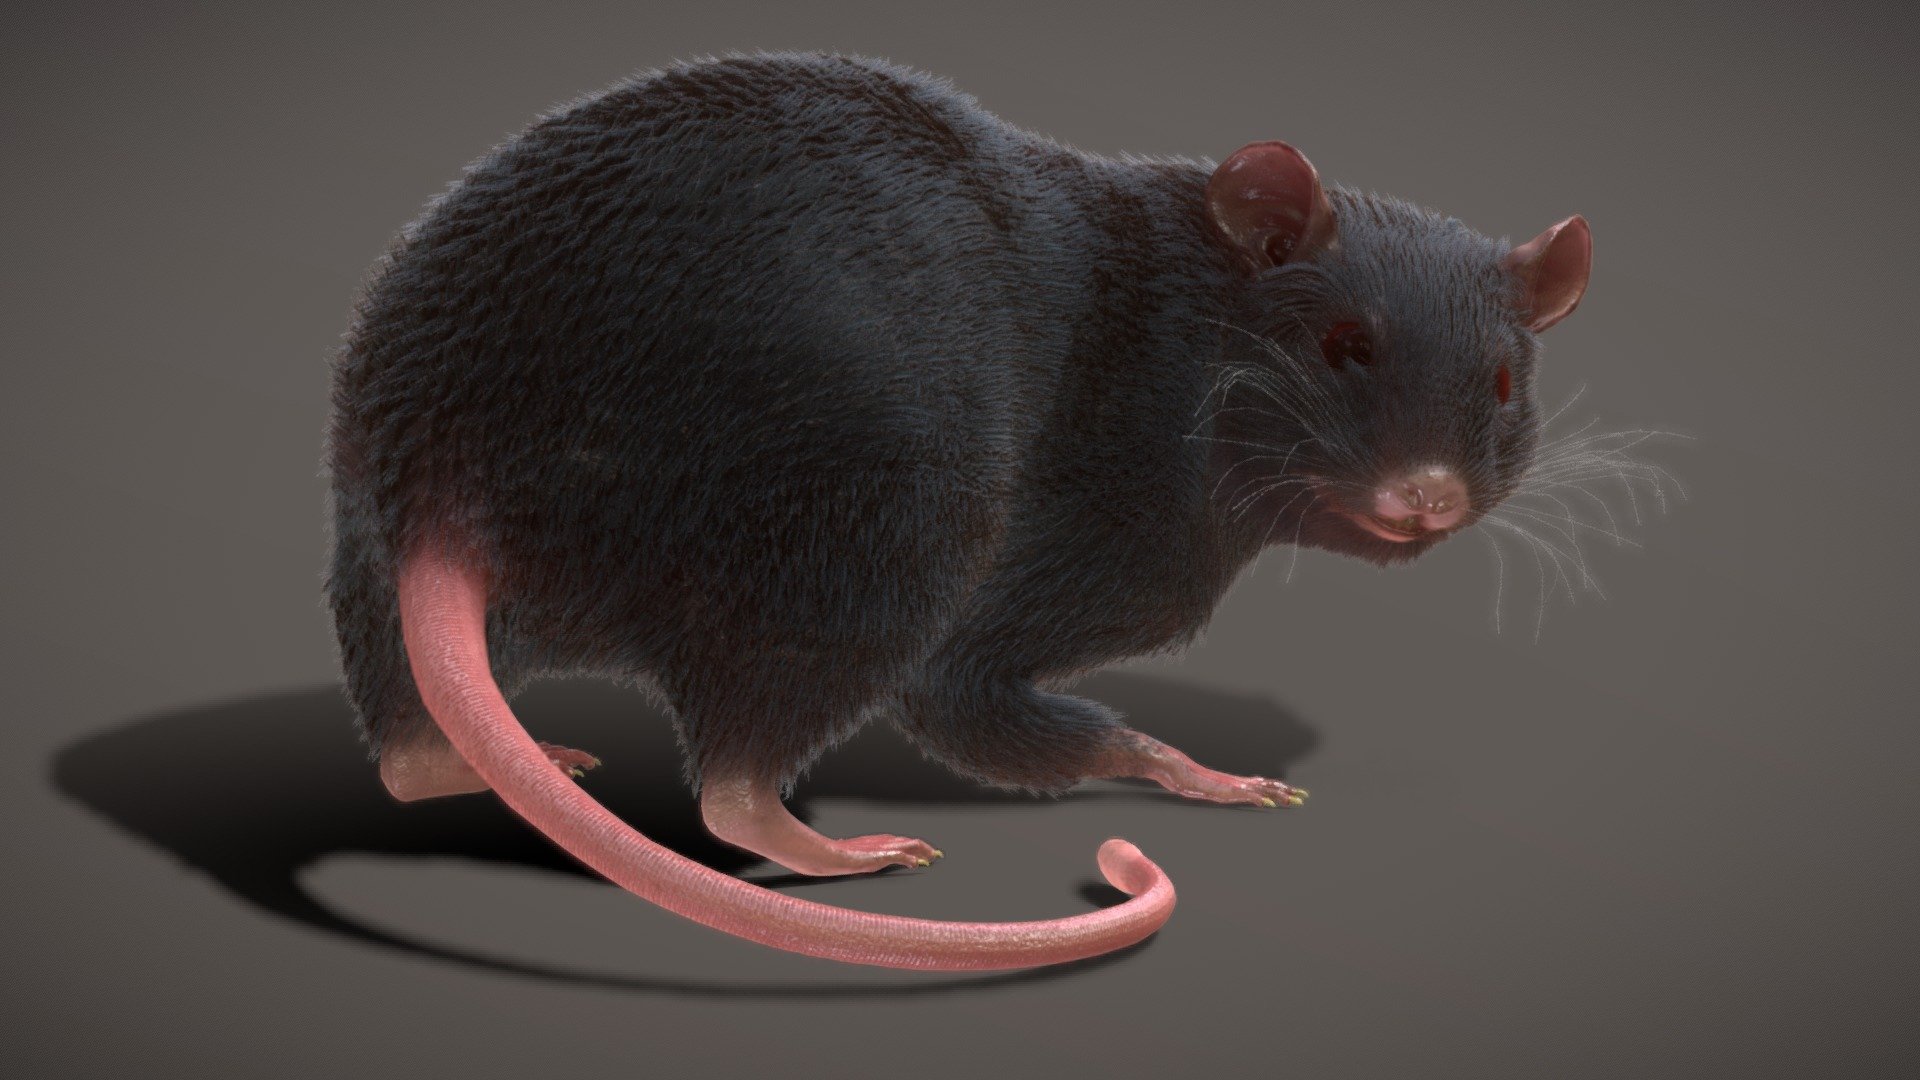 The model was made in 3dmax 2021 with skin modifer and rigged with CATrig.



Model 3  variants or it is can be called like LODs -




Model without polygonal fur : polys - 4k vertex - 4k

Model without polygonal fur : polys - 10k vertex - 10k

Rat with polyfur - On screen in 3d.


https://www.flickr.com/photos/192786338@N06/52017656061/in/dateposted-public/



Animations only in fbx format:




8 Idles 

1 walk 

2 run
 - Rat Rigged Animated PBR real-time Fur 3d model